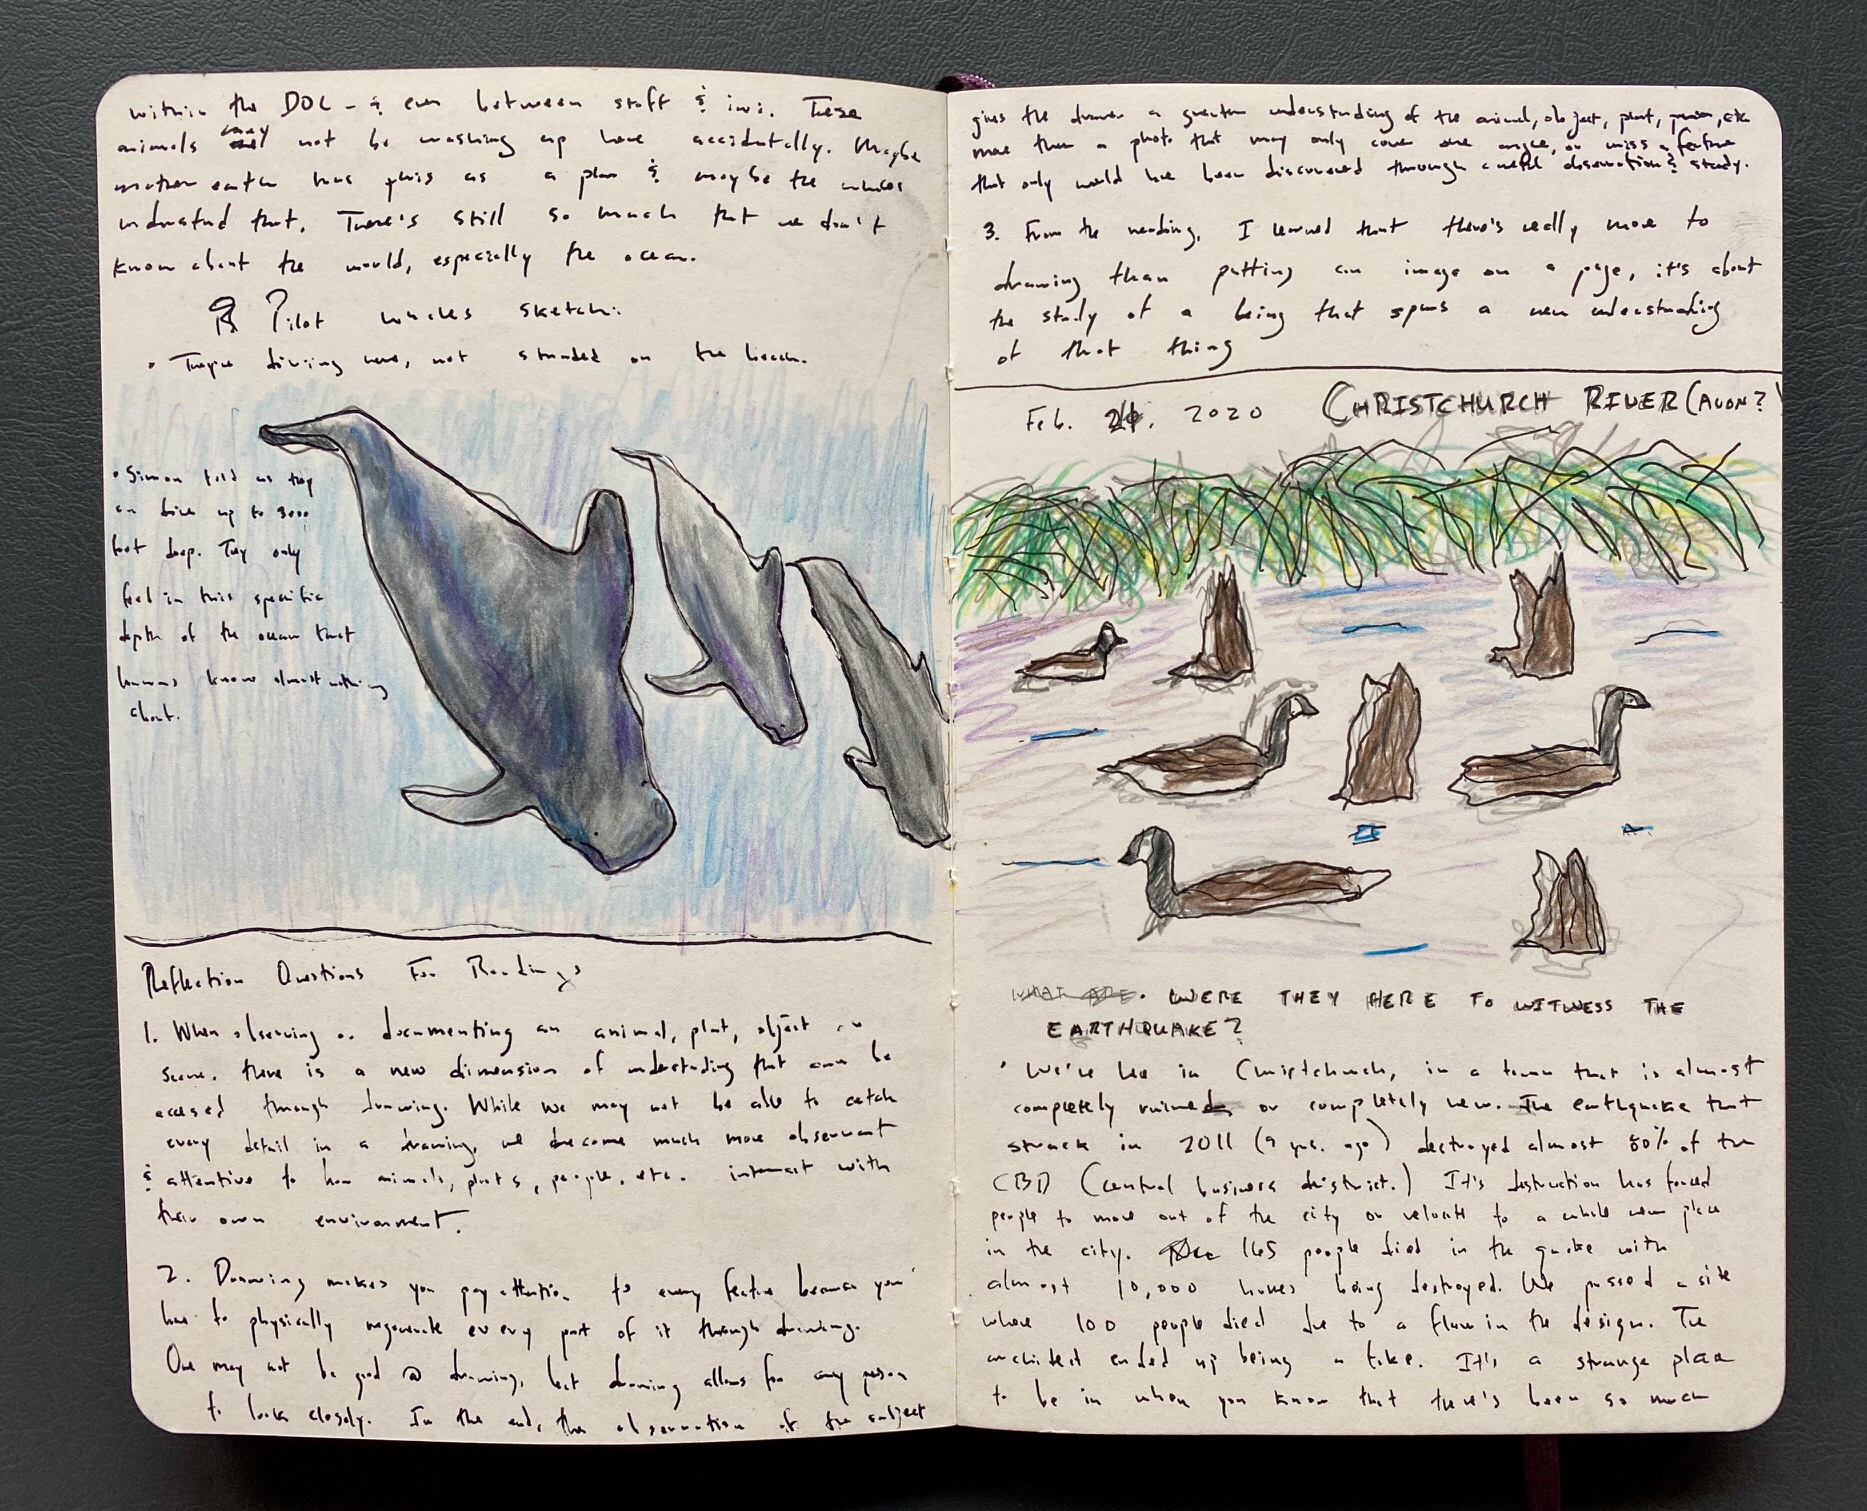 Field drawing of whales and ducks